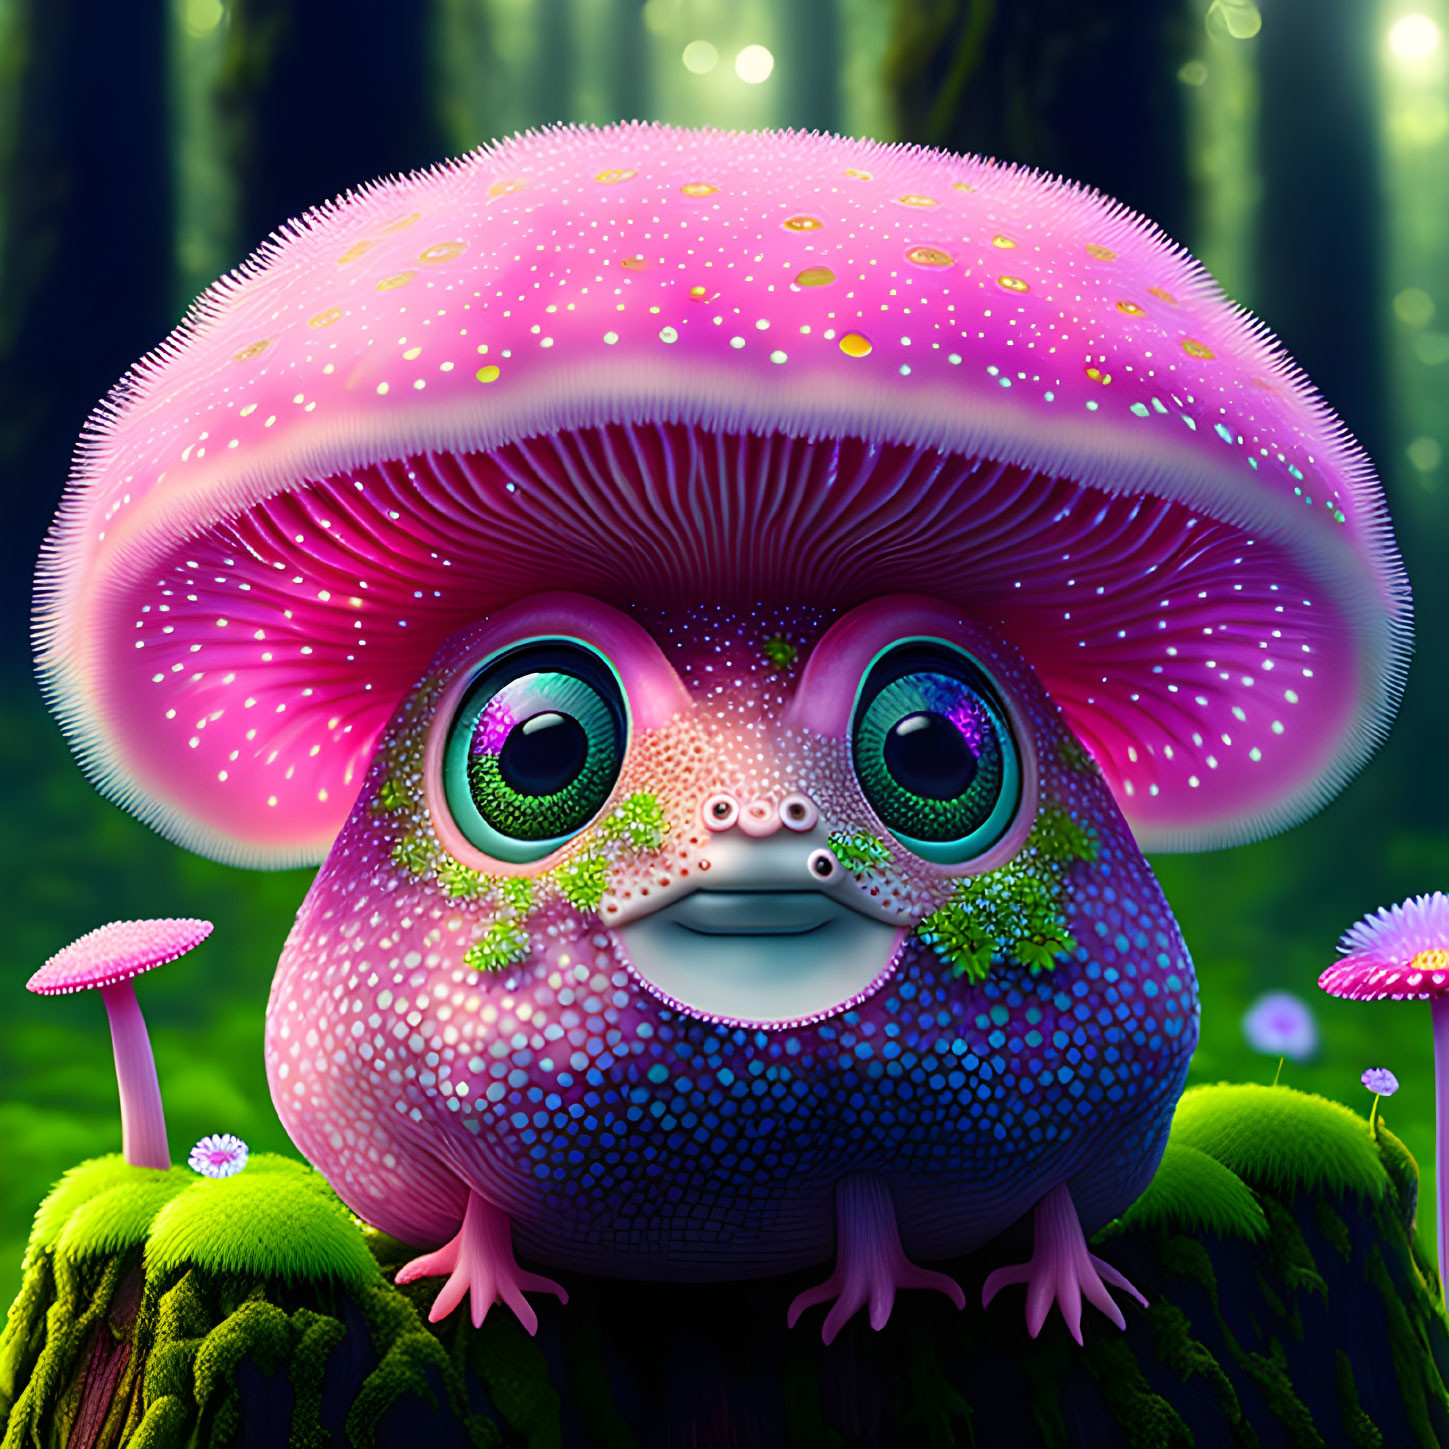 Colorful Creature with Mushroom Cap Head in Enchanted Forest